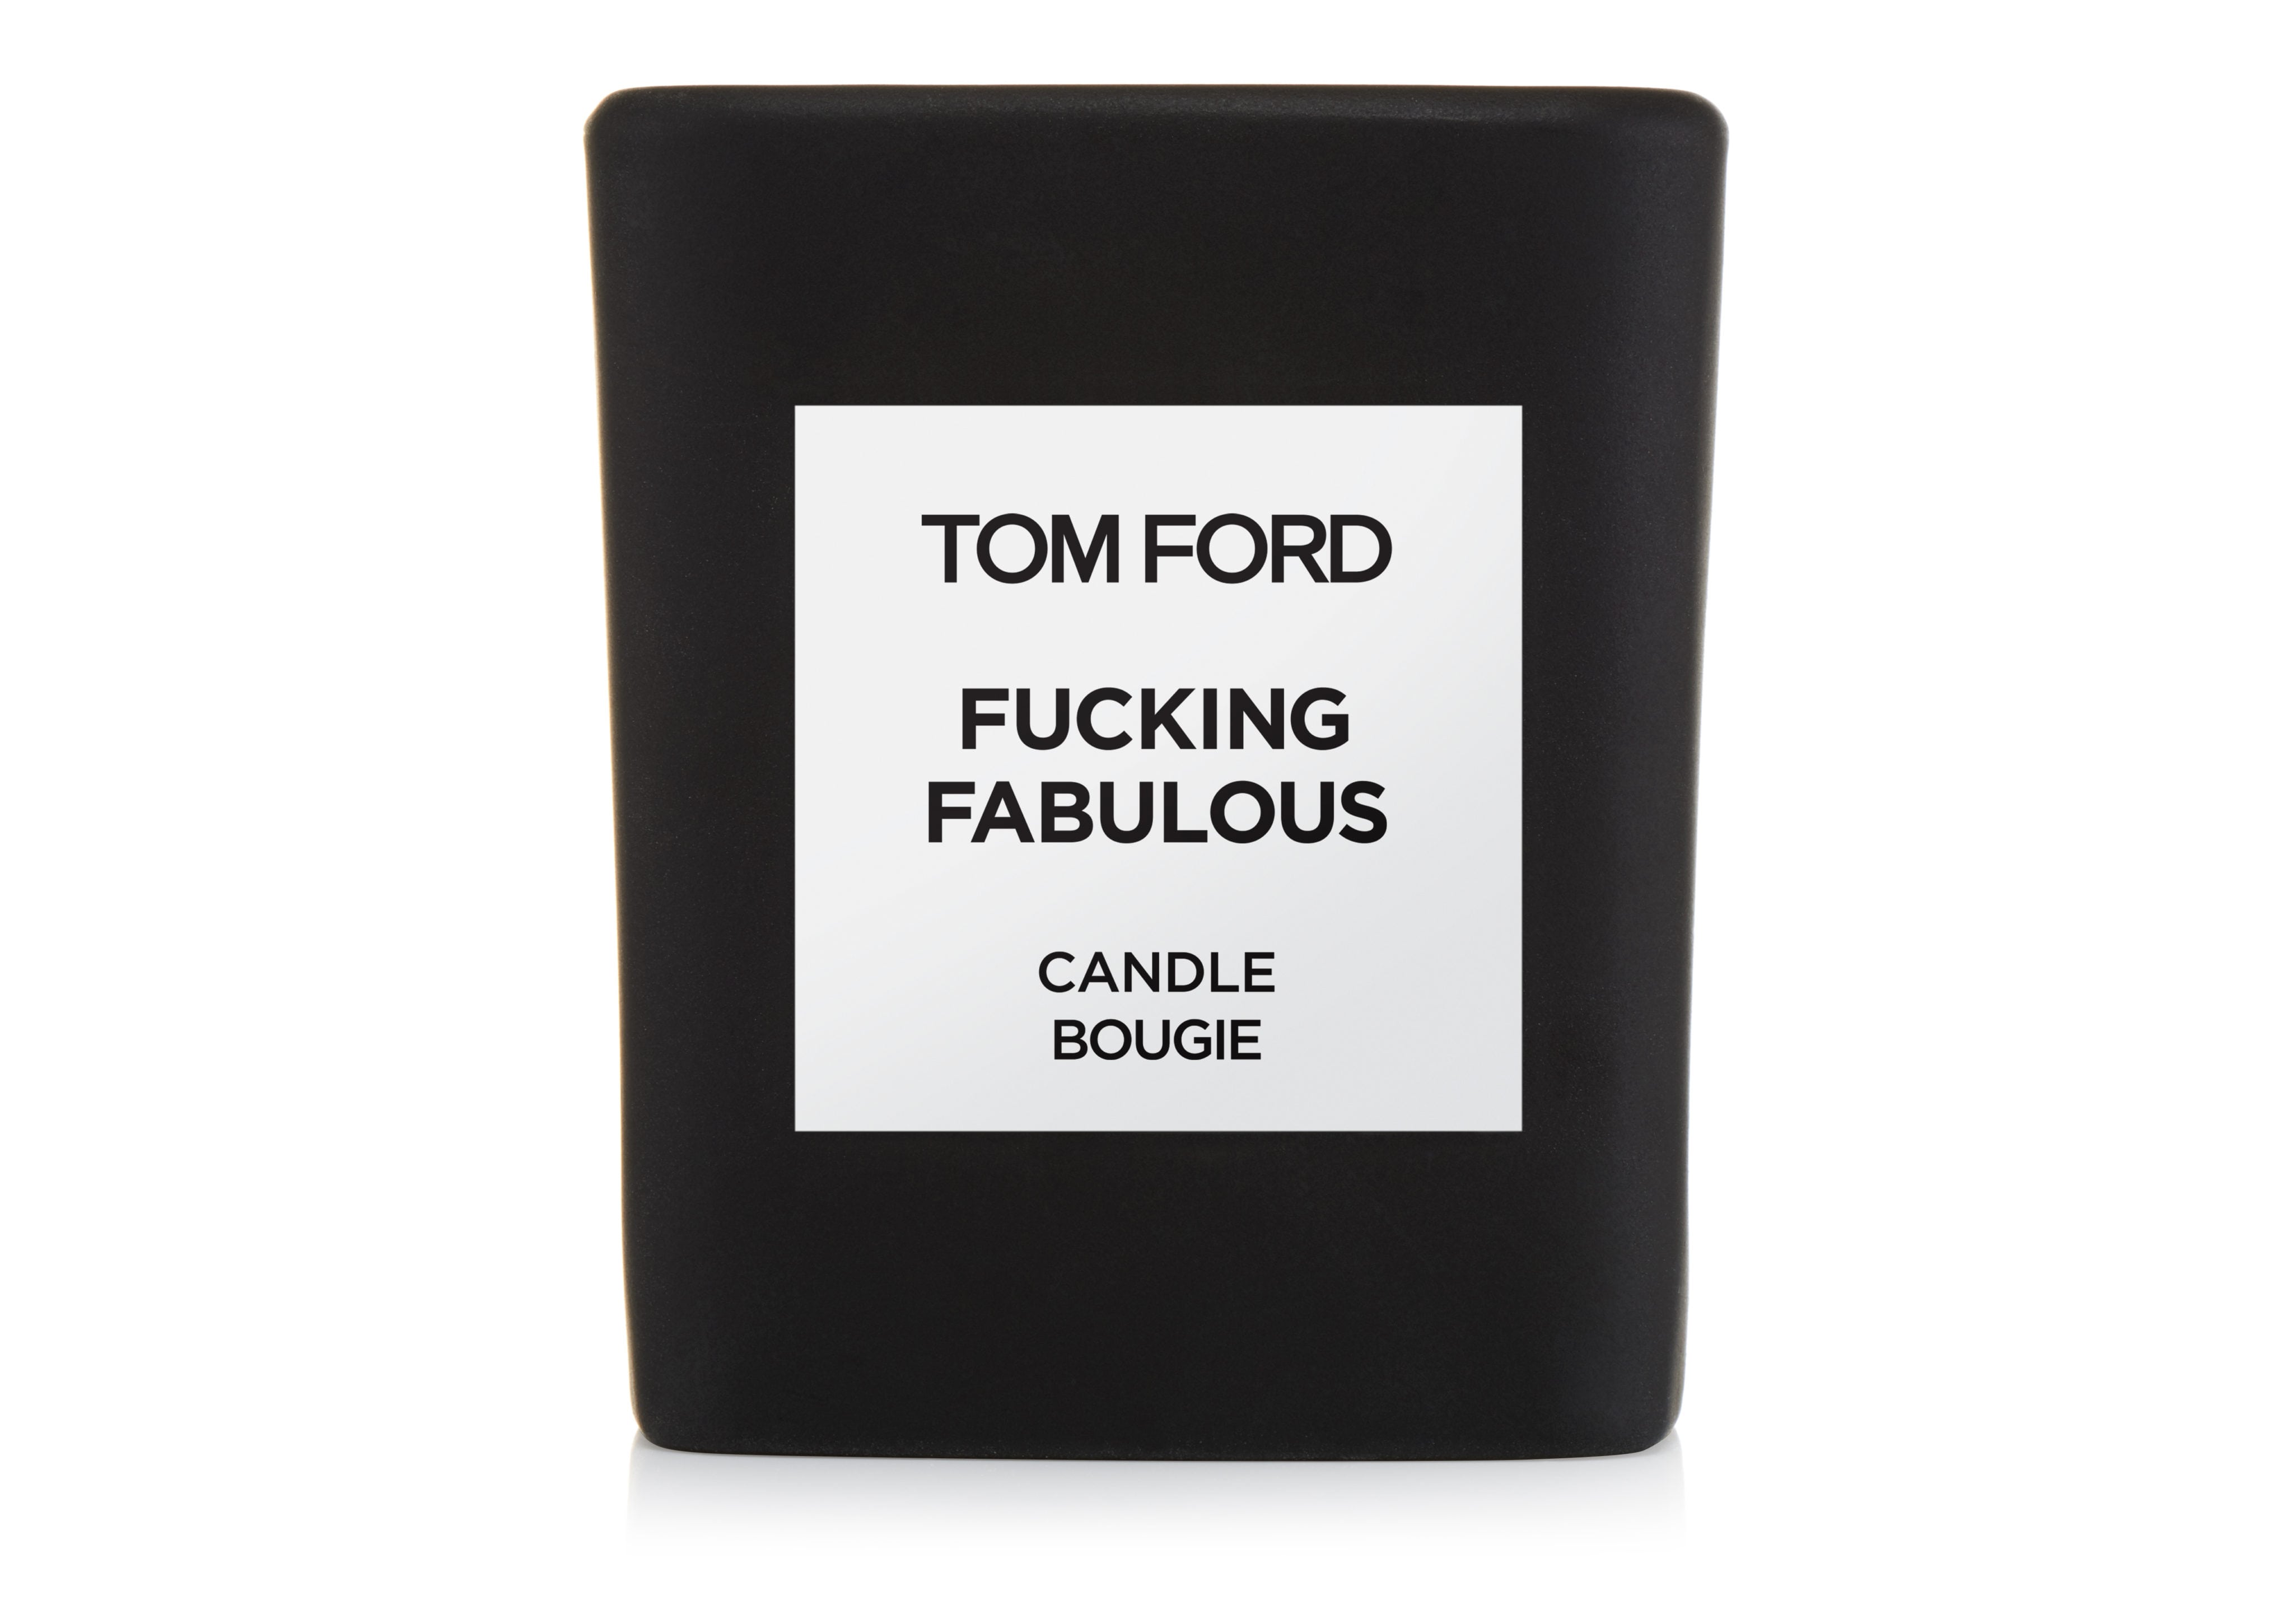 Tom-Ford-F.cking-Fabulous-Candle.jpg